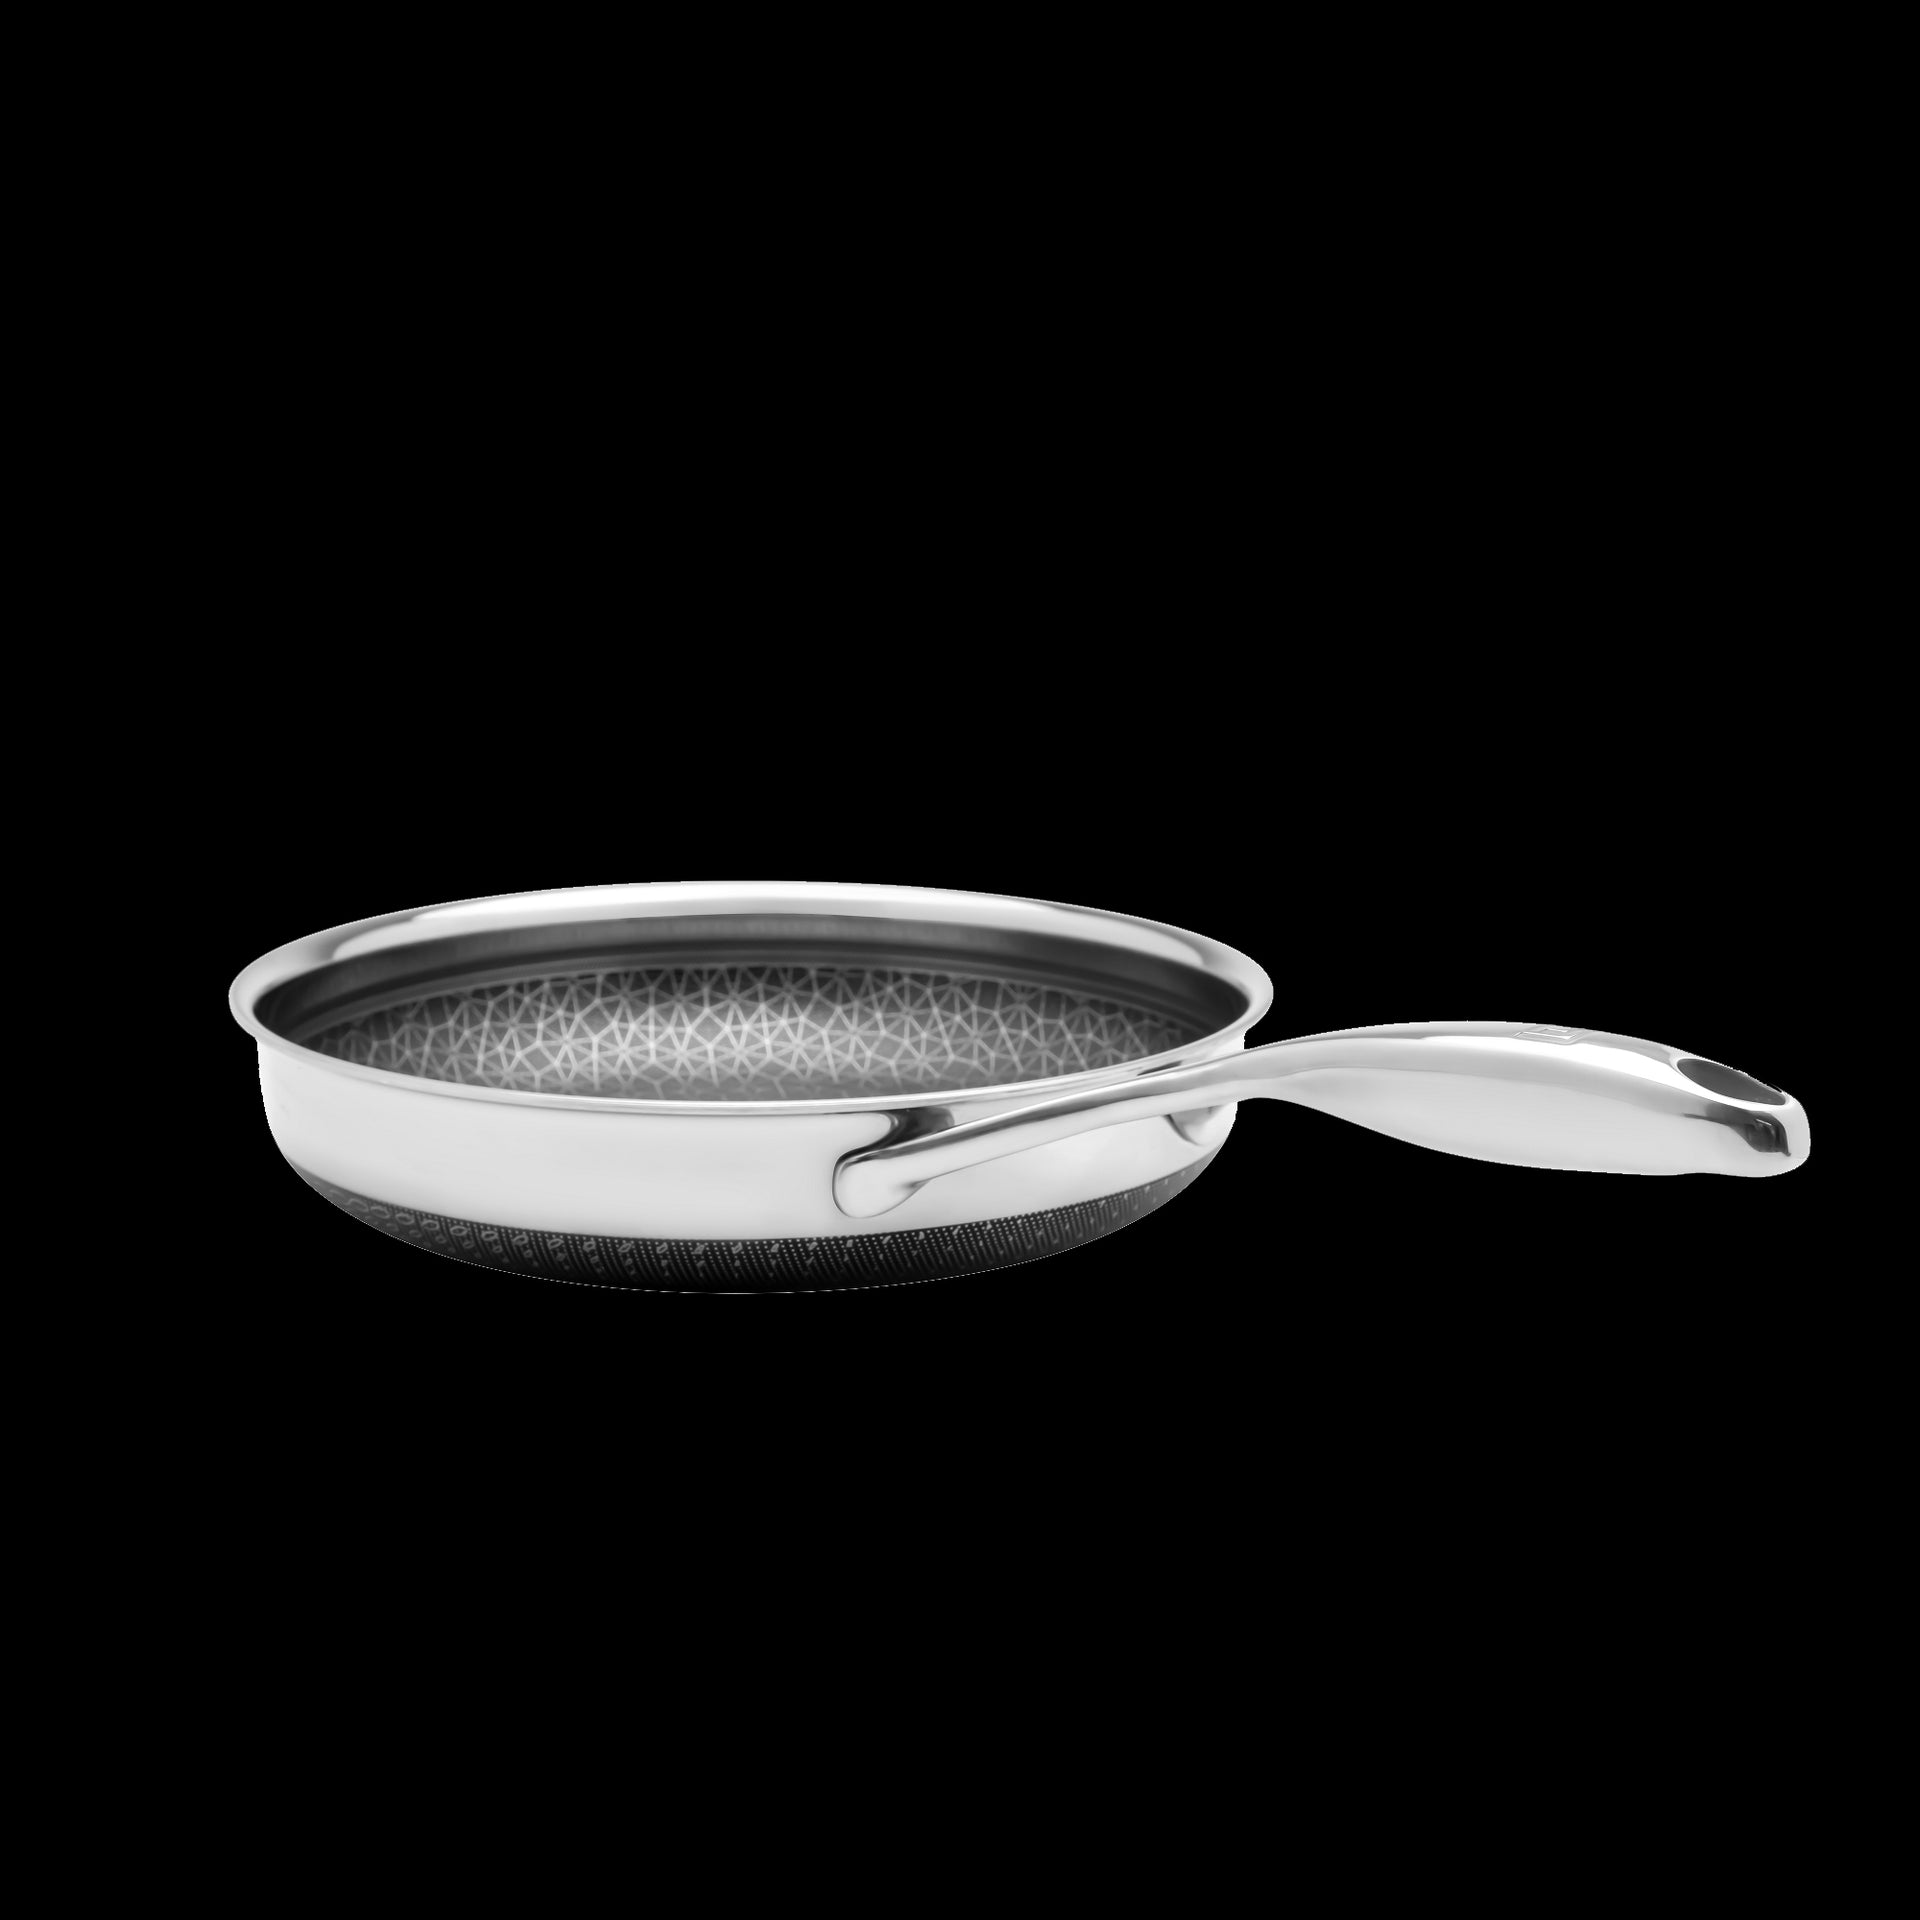 DiamondClad™ 10 Inch Thermowave™ Hybrid Pan and Lid Set